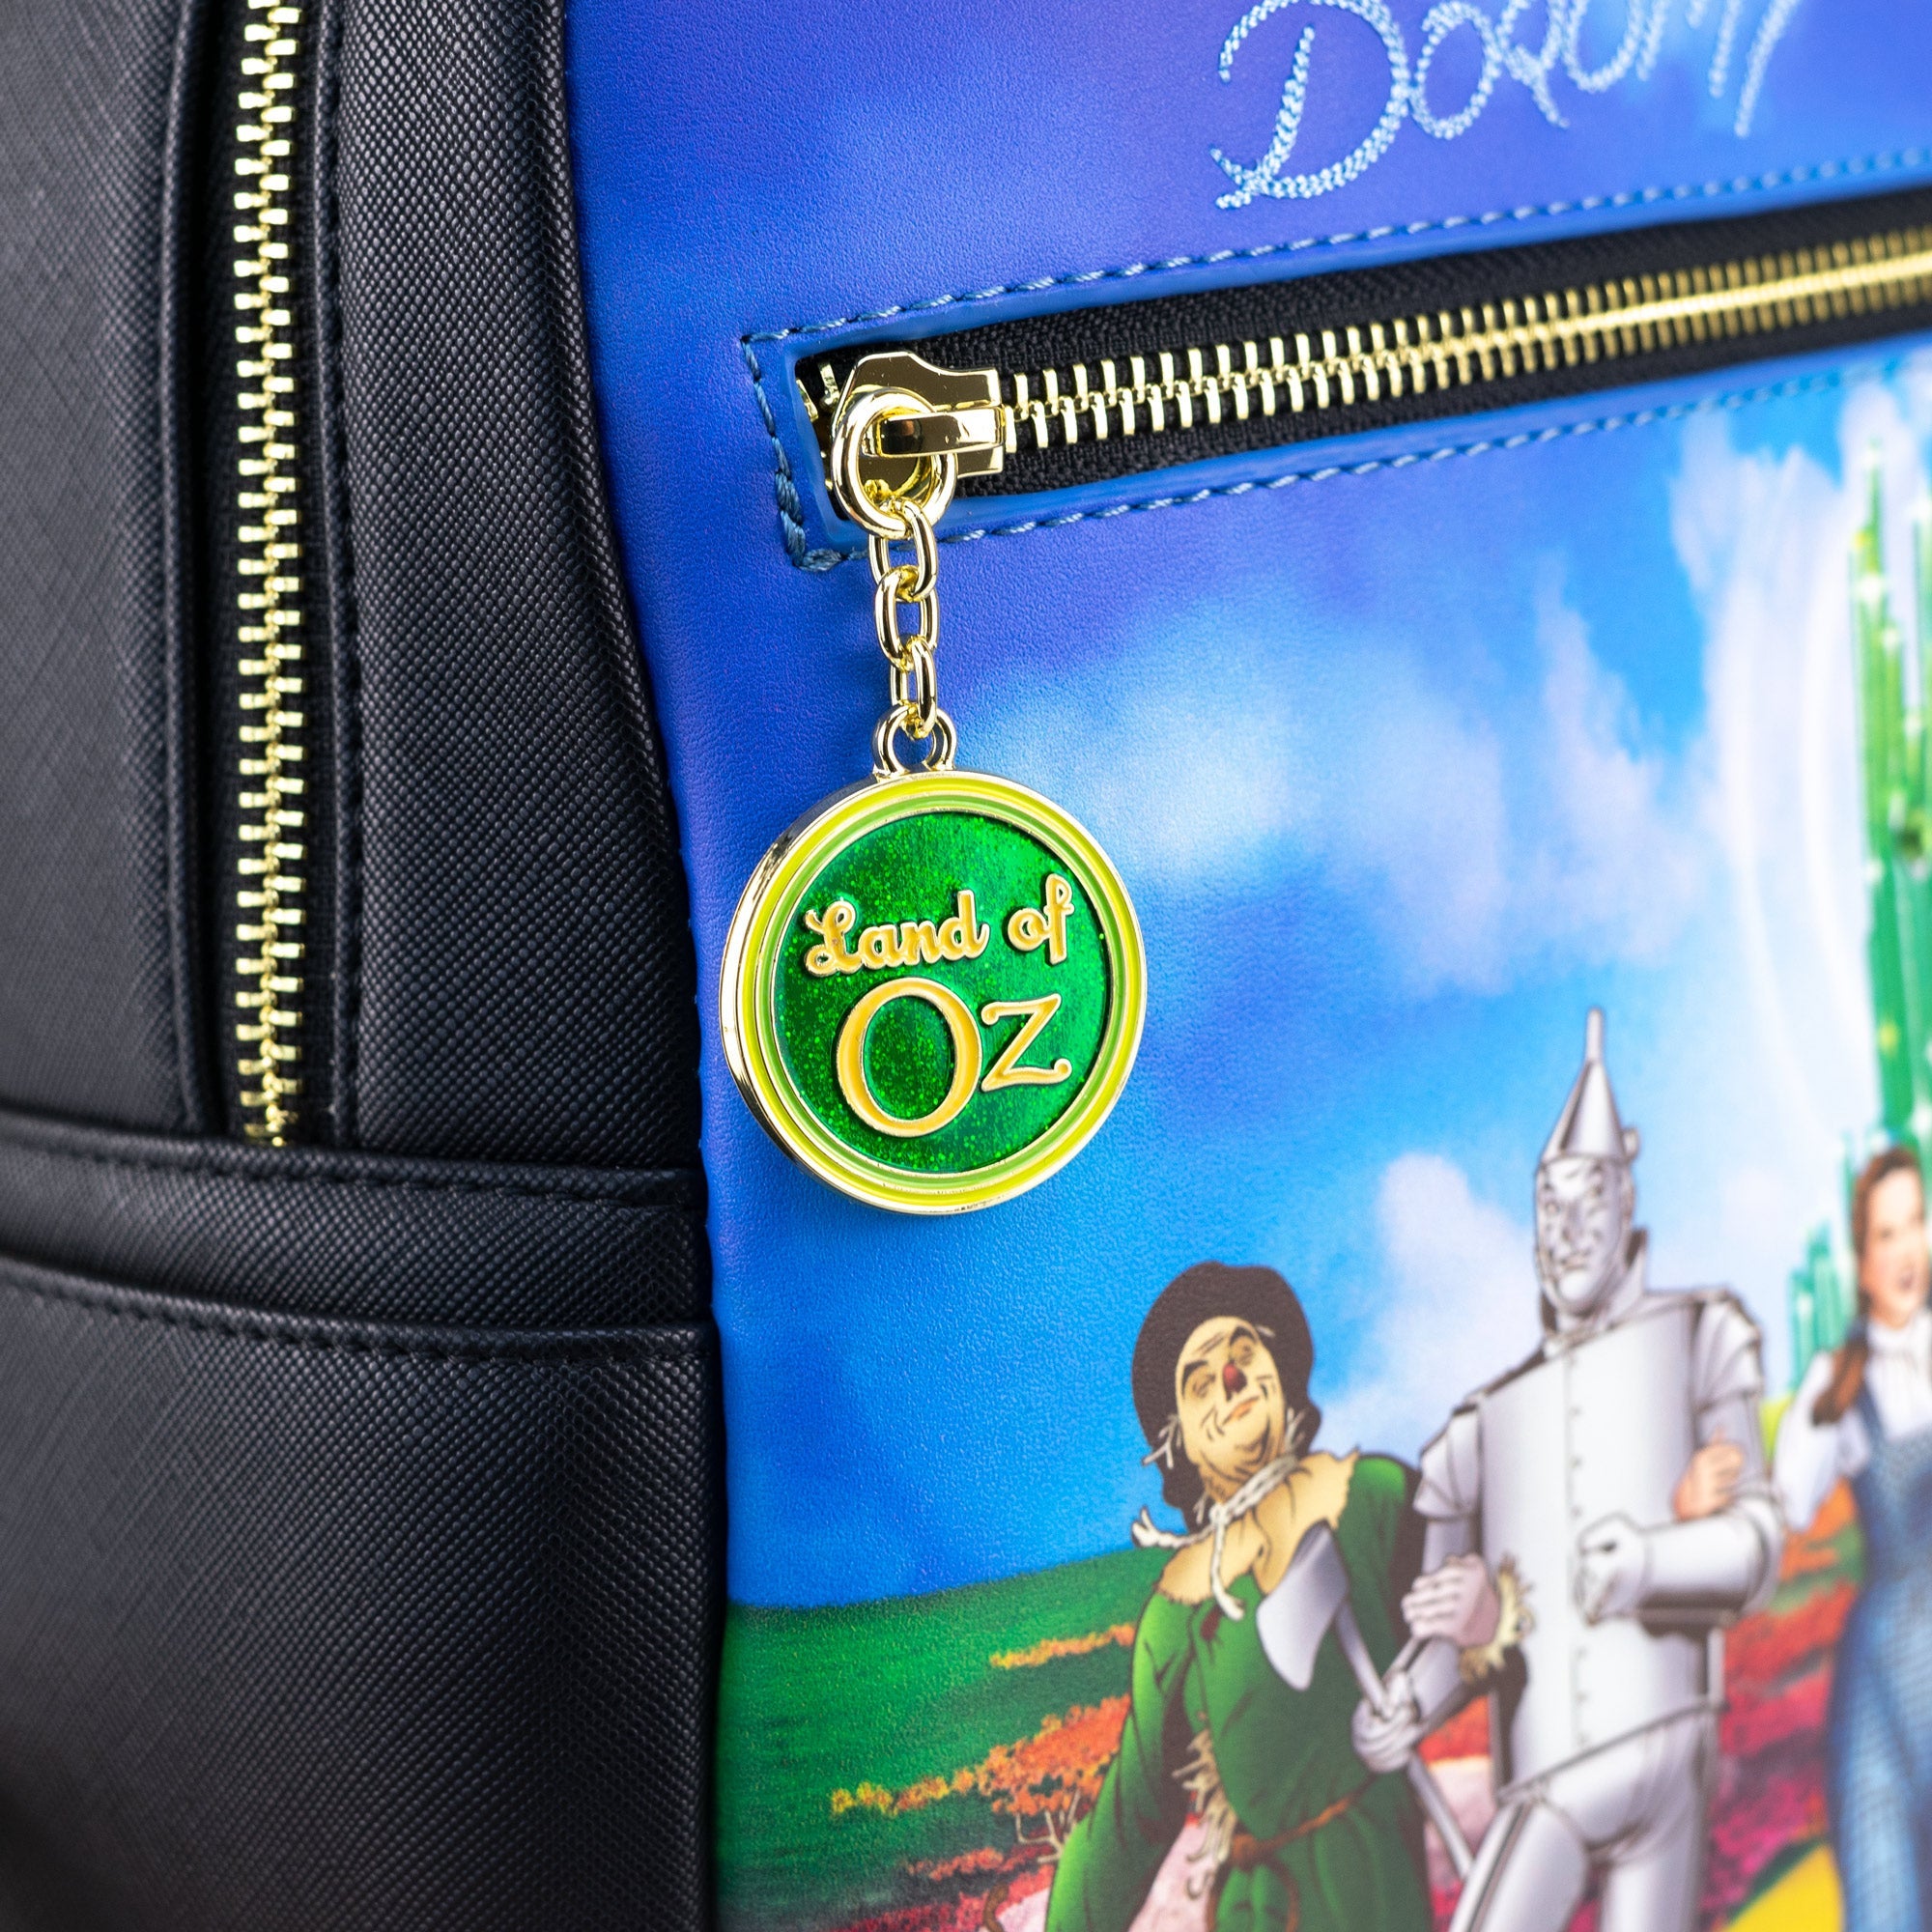 Loungefly x Wizard of Oz Character Ensemble Mini Backpack - GeekCore